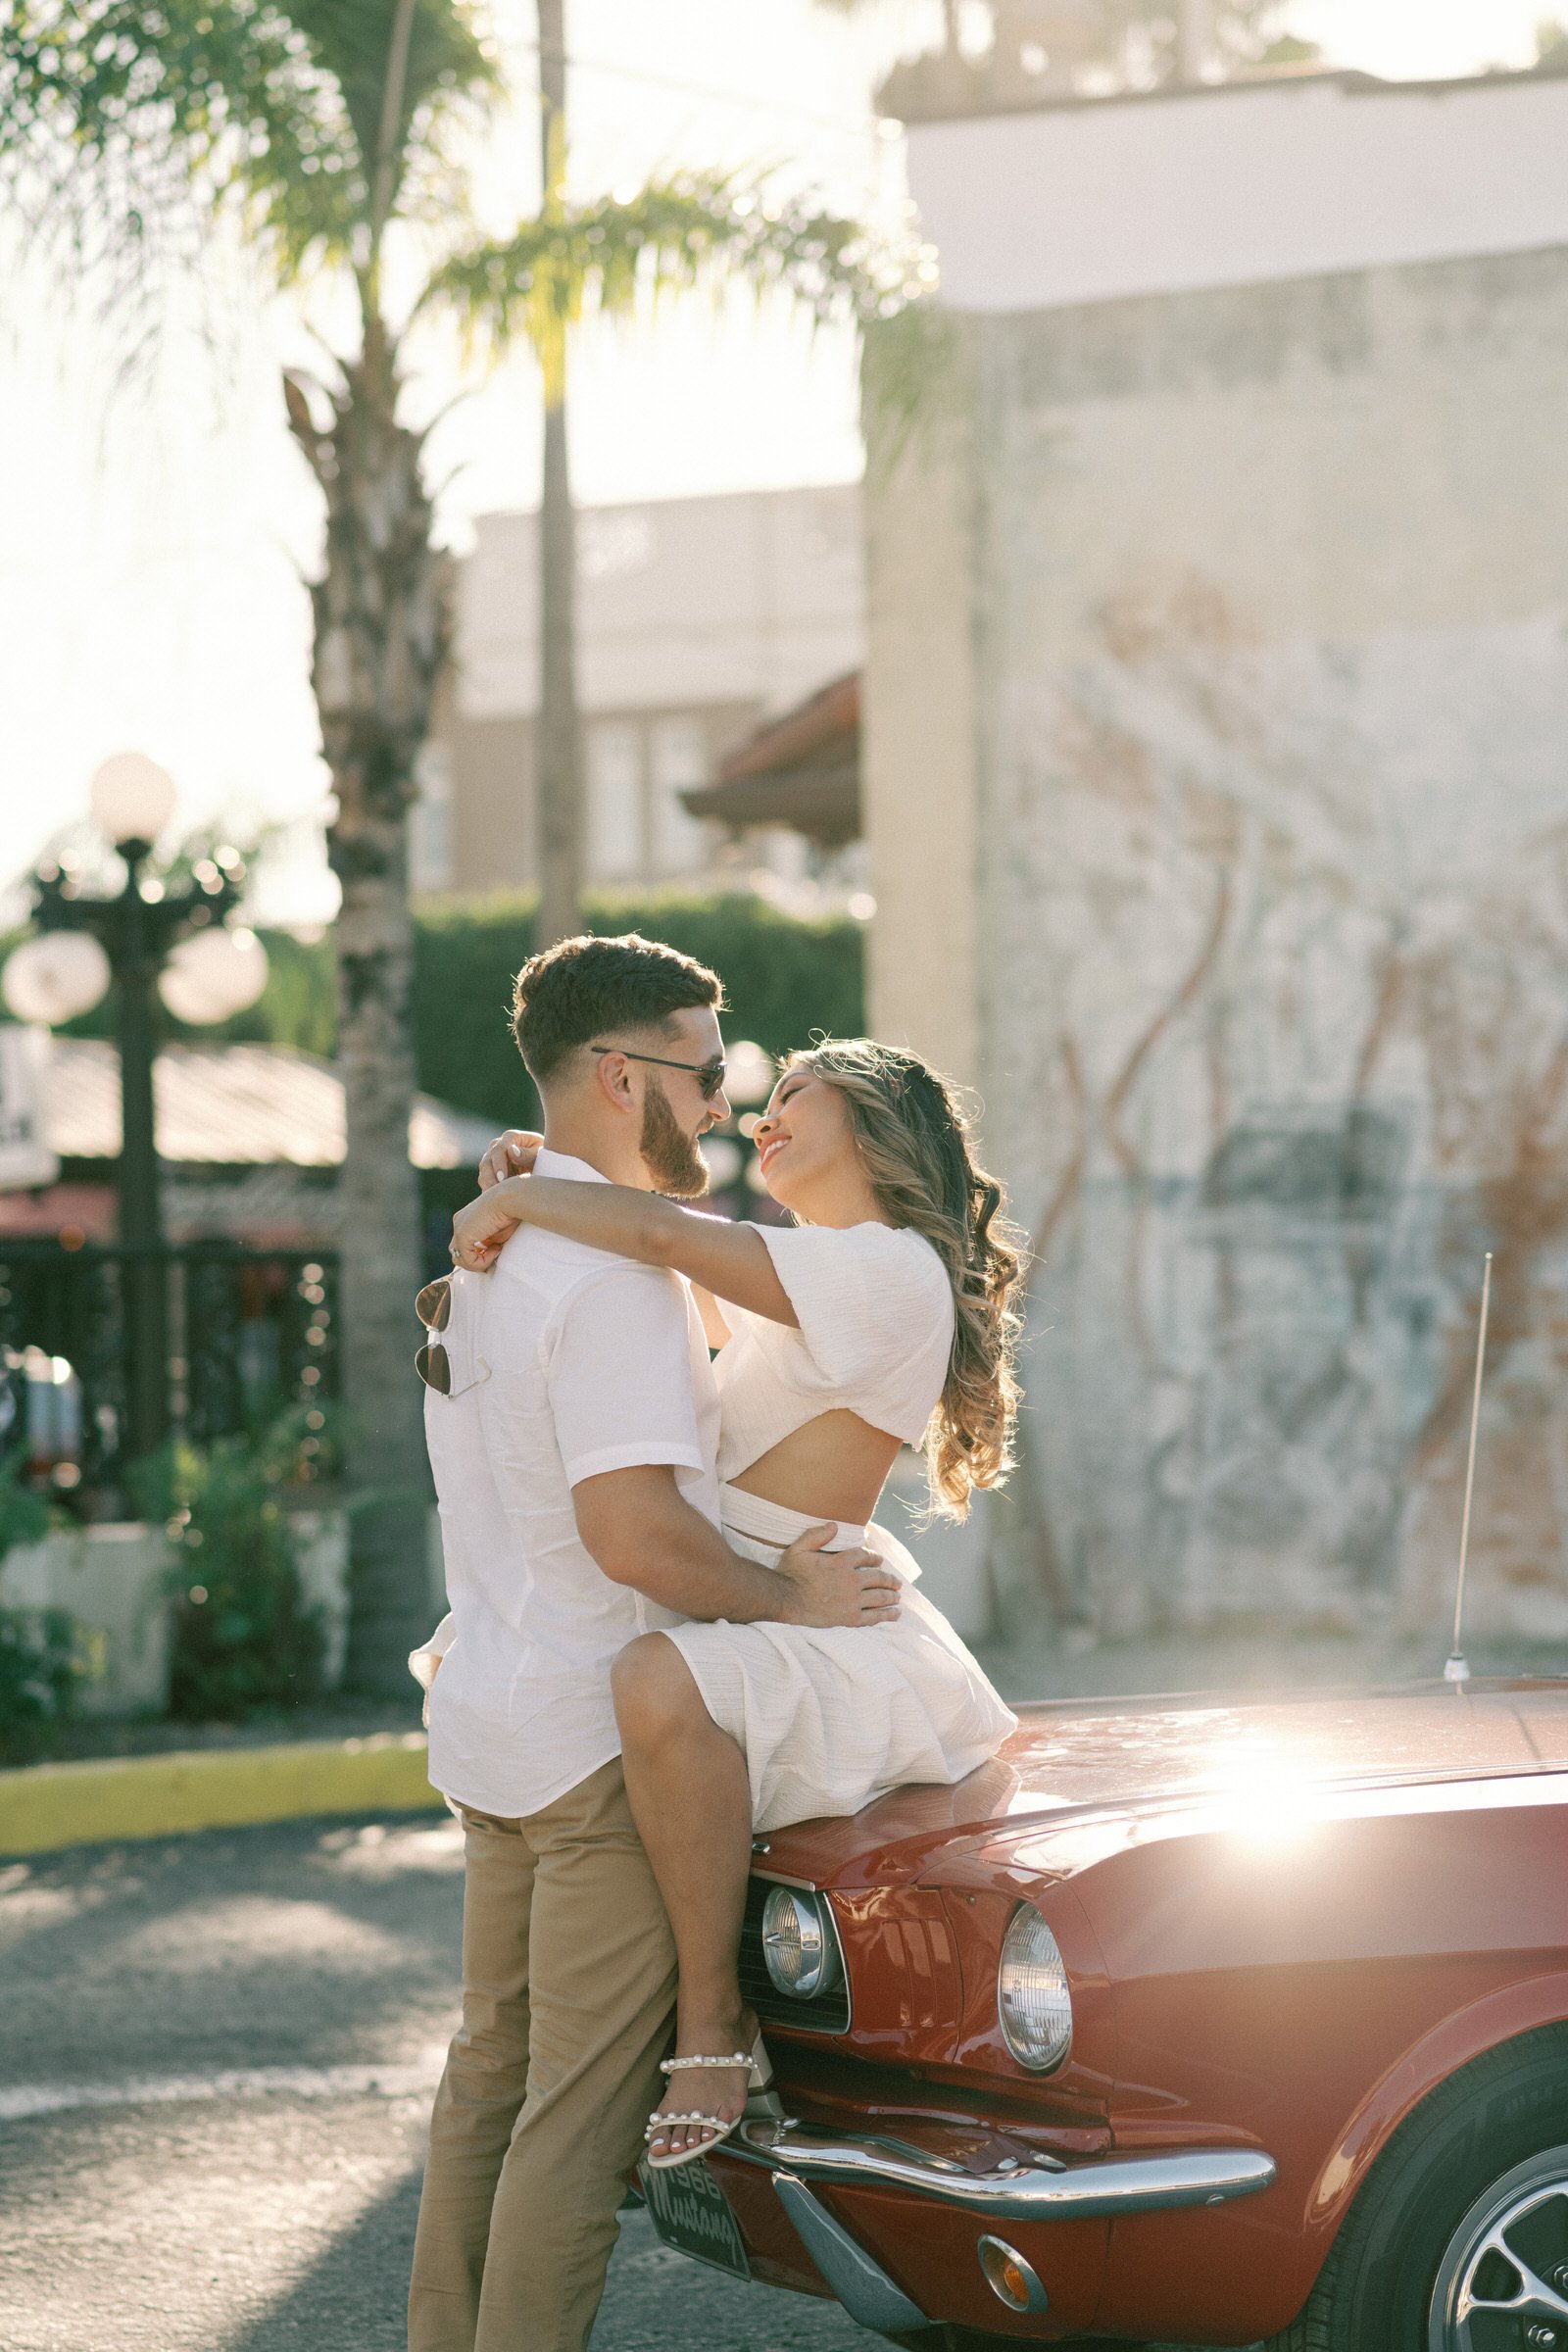 Copyright-Dewitt-for-Love-Photography-M-M-Ybor-City-Tampa-Engagement-Session-25.jpg